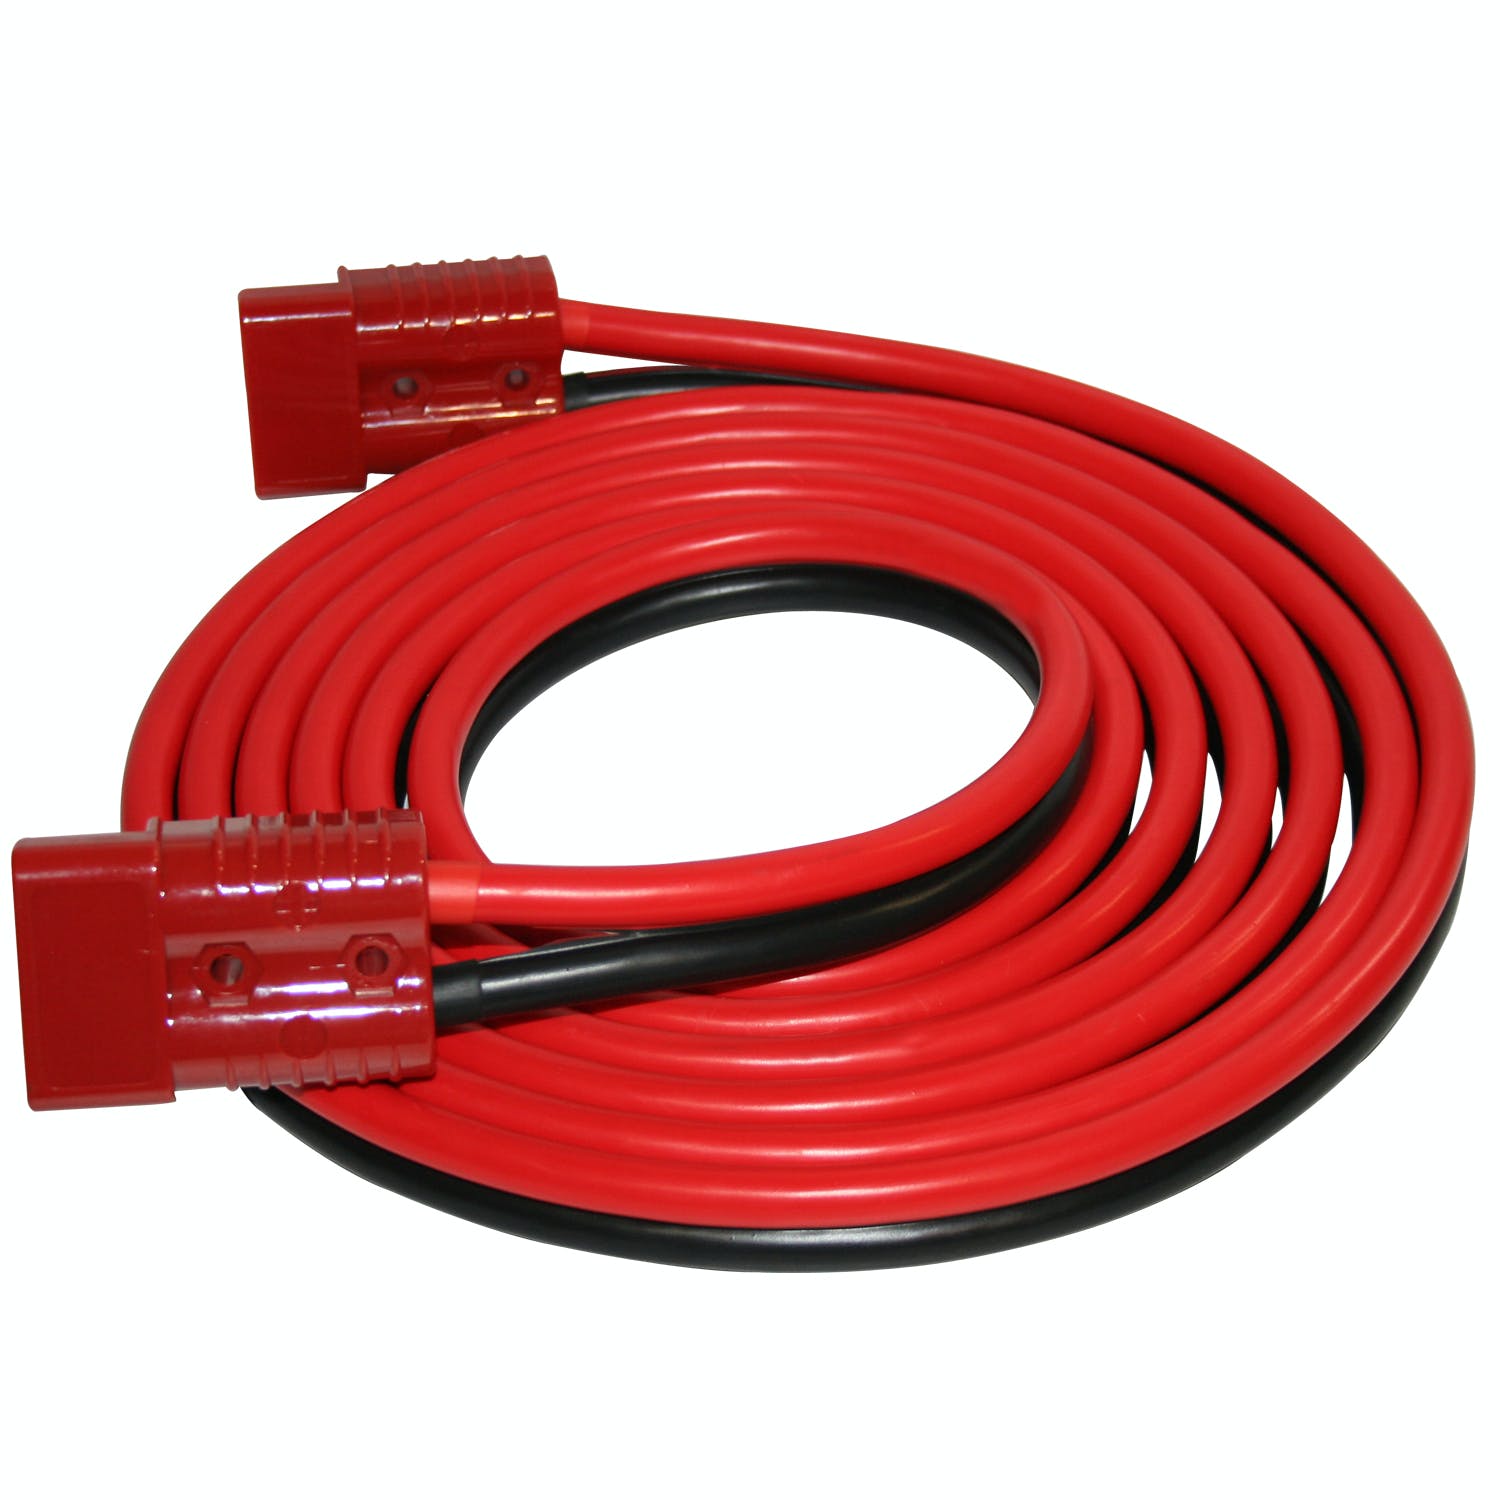 Bulldog Winch Co LLC 20219 Jumper Cable Set, 2ga, 15ft with Quick Connects